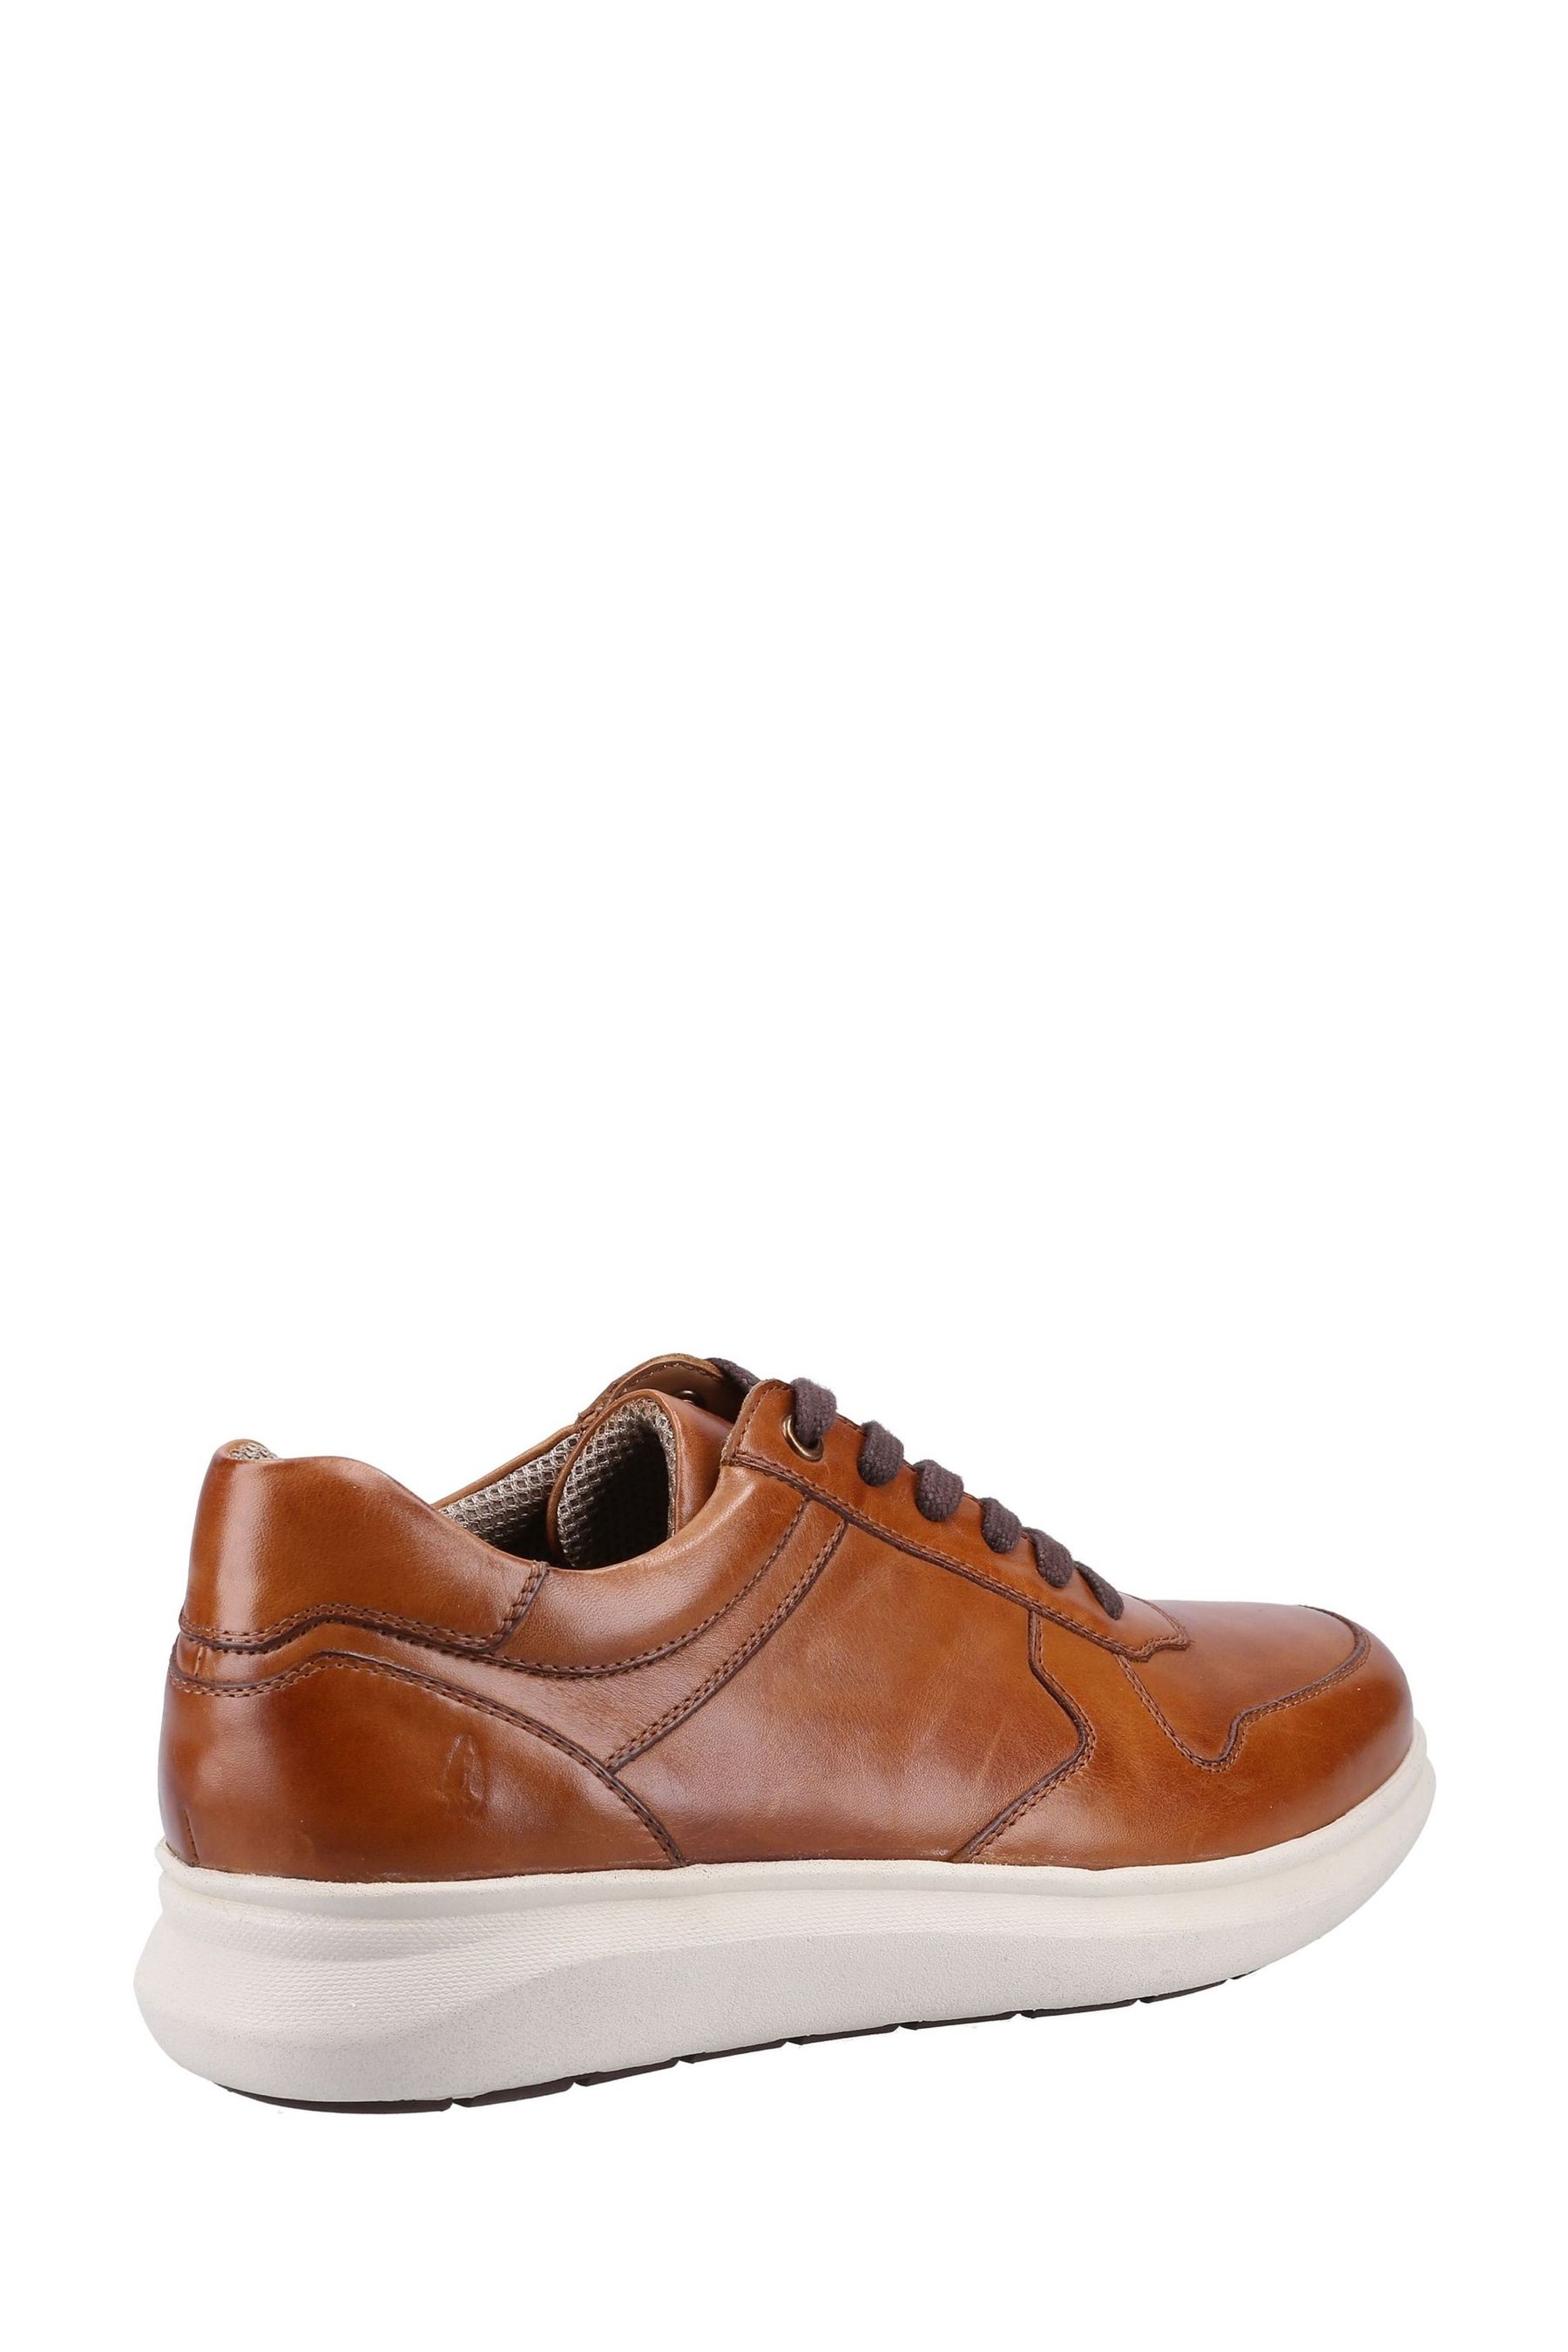 Buy Hush Puppies Natural Braxton Sneakers from the Next UK online shop